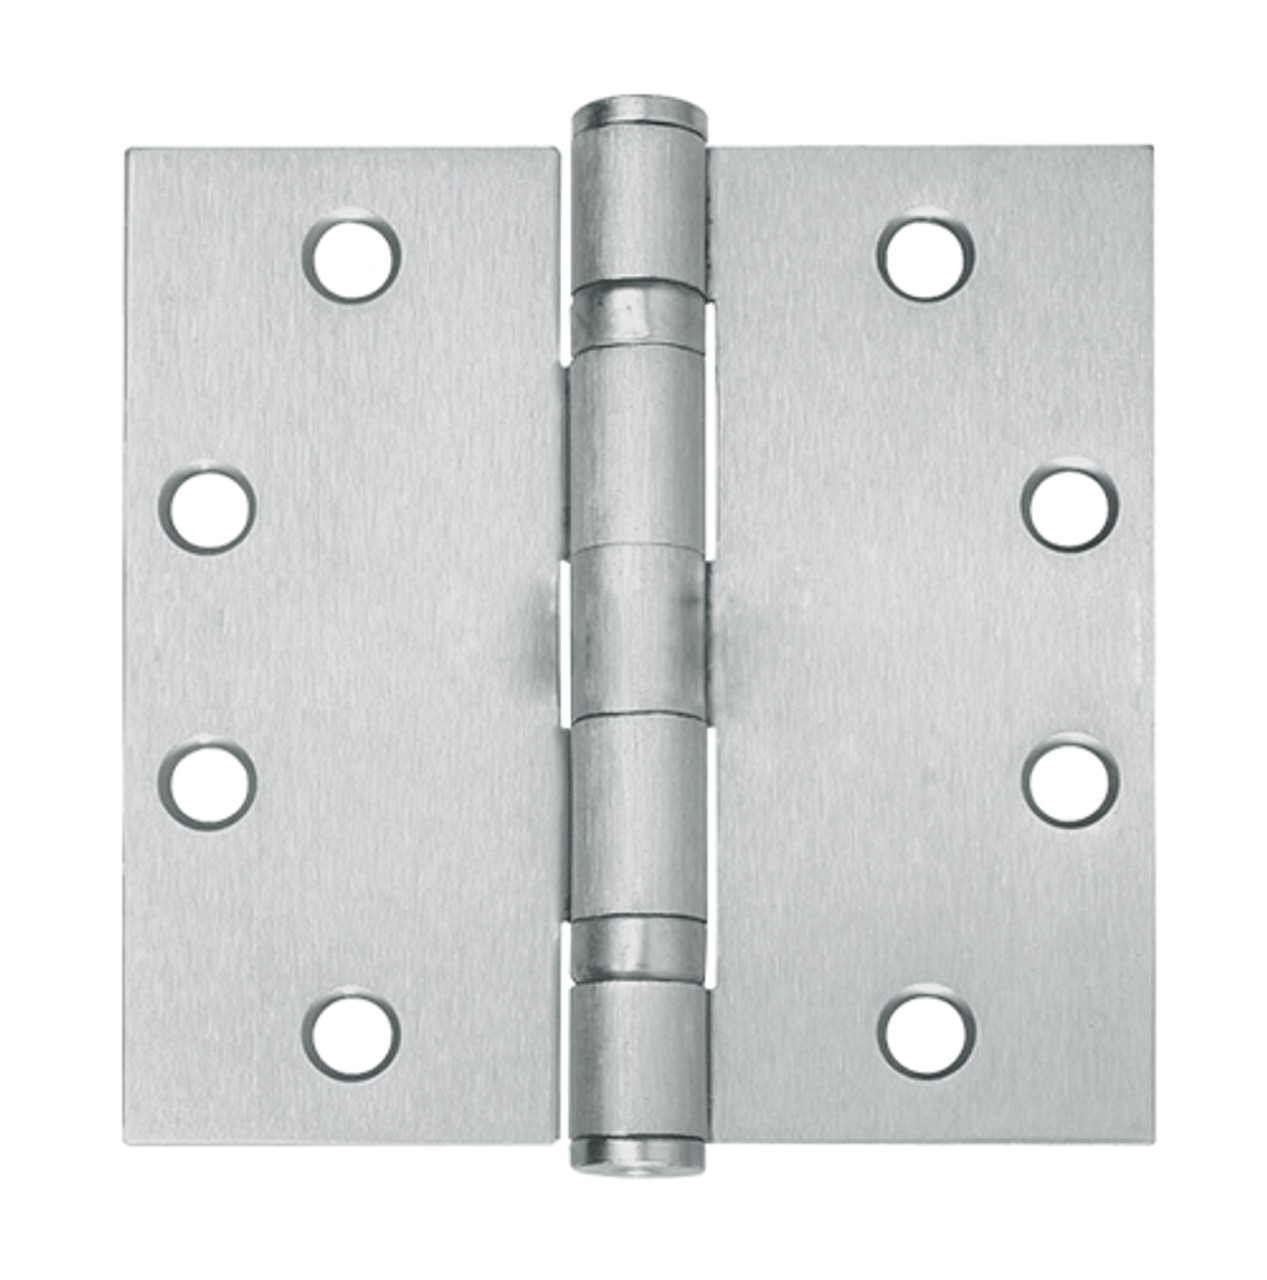 5BB1-5x4-5-600-TW4 IVES 5 Knuckle Ball Bearing Full Mortise Hinge with Electric Thru-Wire in Primed for Paint - Steel